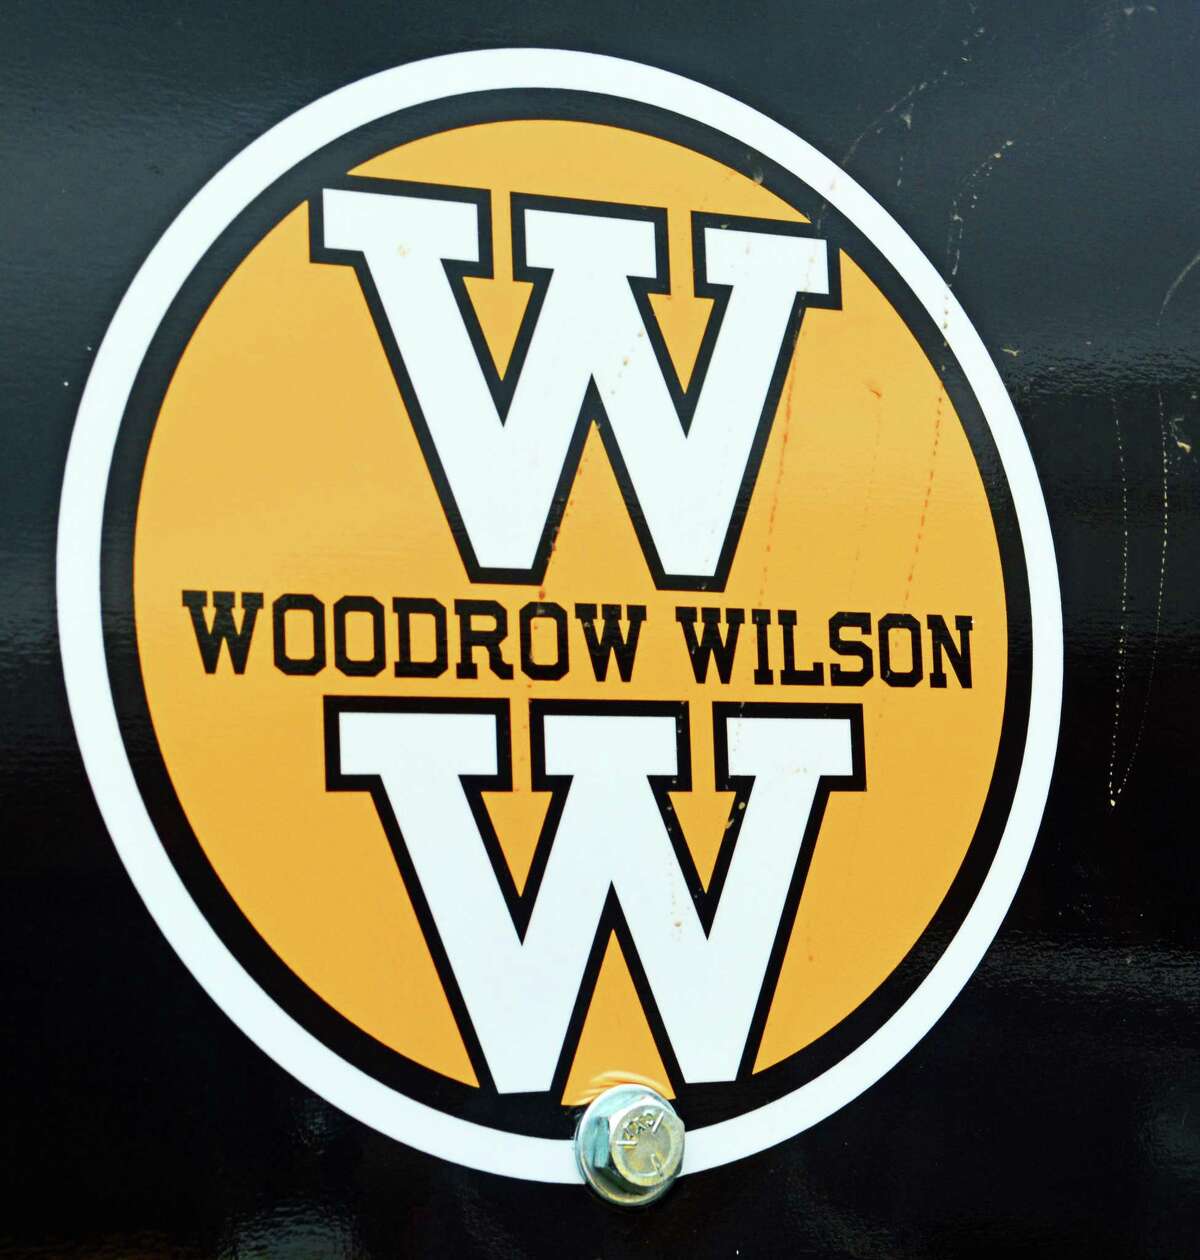 Woodrow Wilson Middle School’s colors are black and gold.